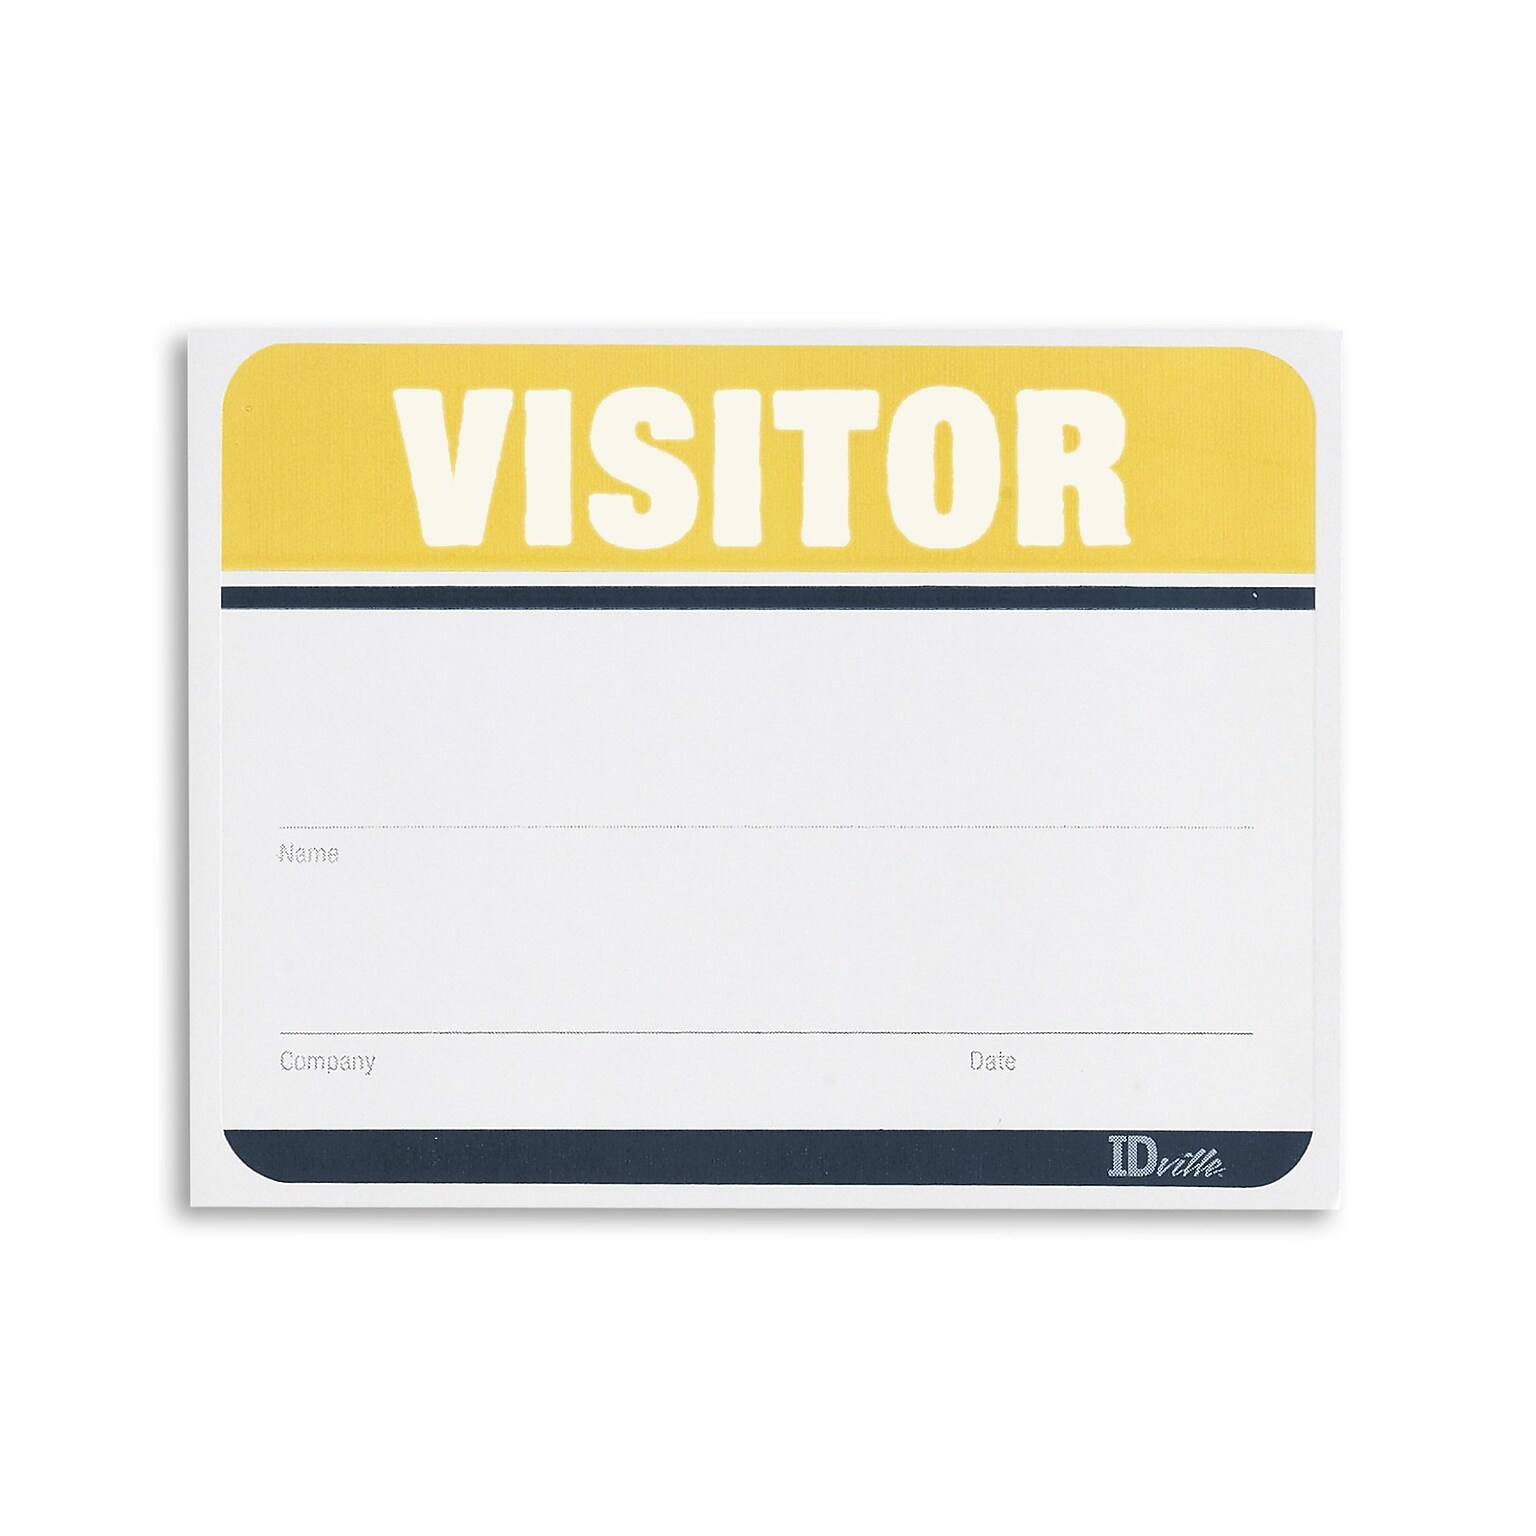 IDville Adhesive Fill in the Blank Visitor Labels, Yellow, 100/Pack (1341017YL31)